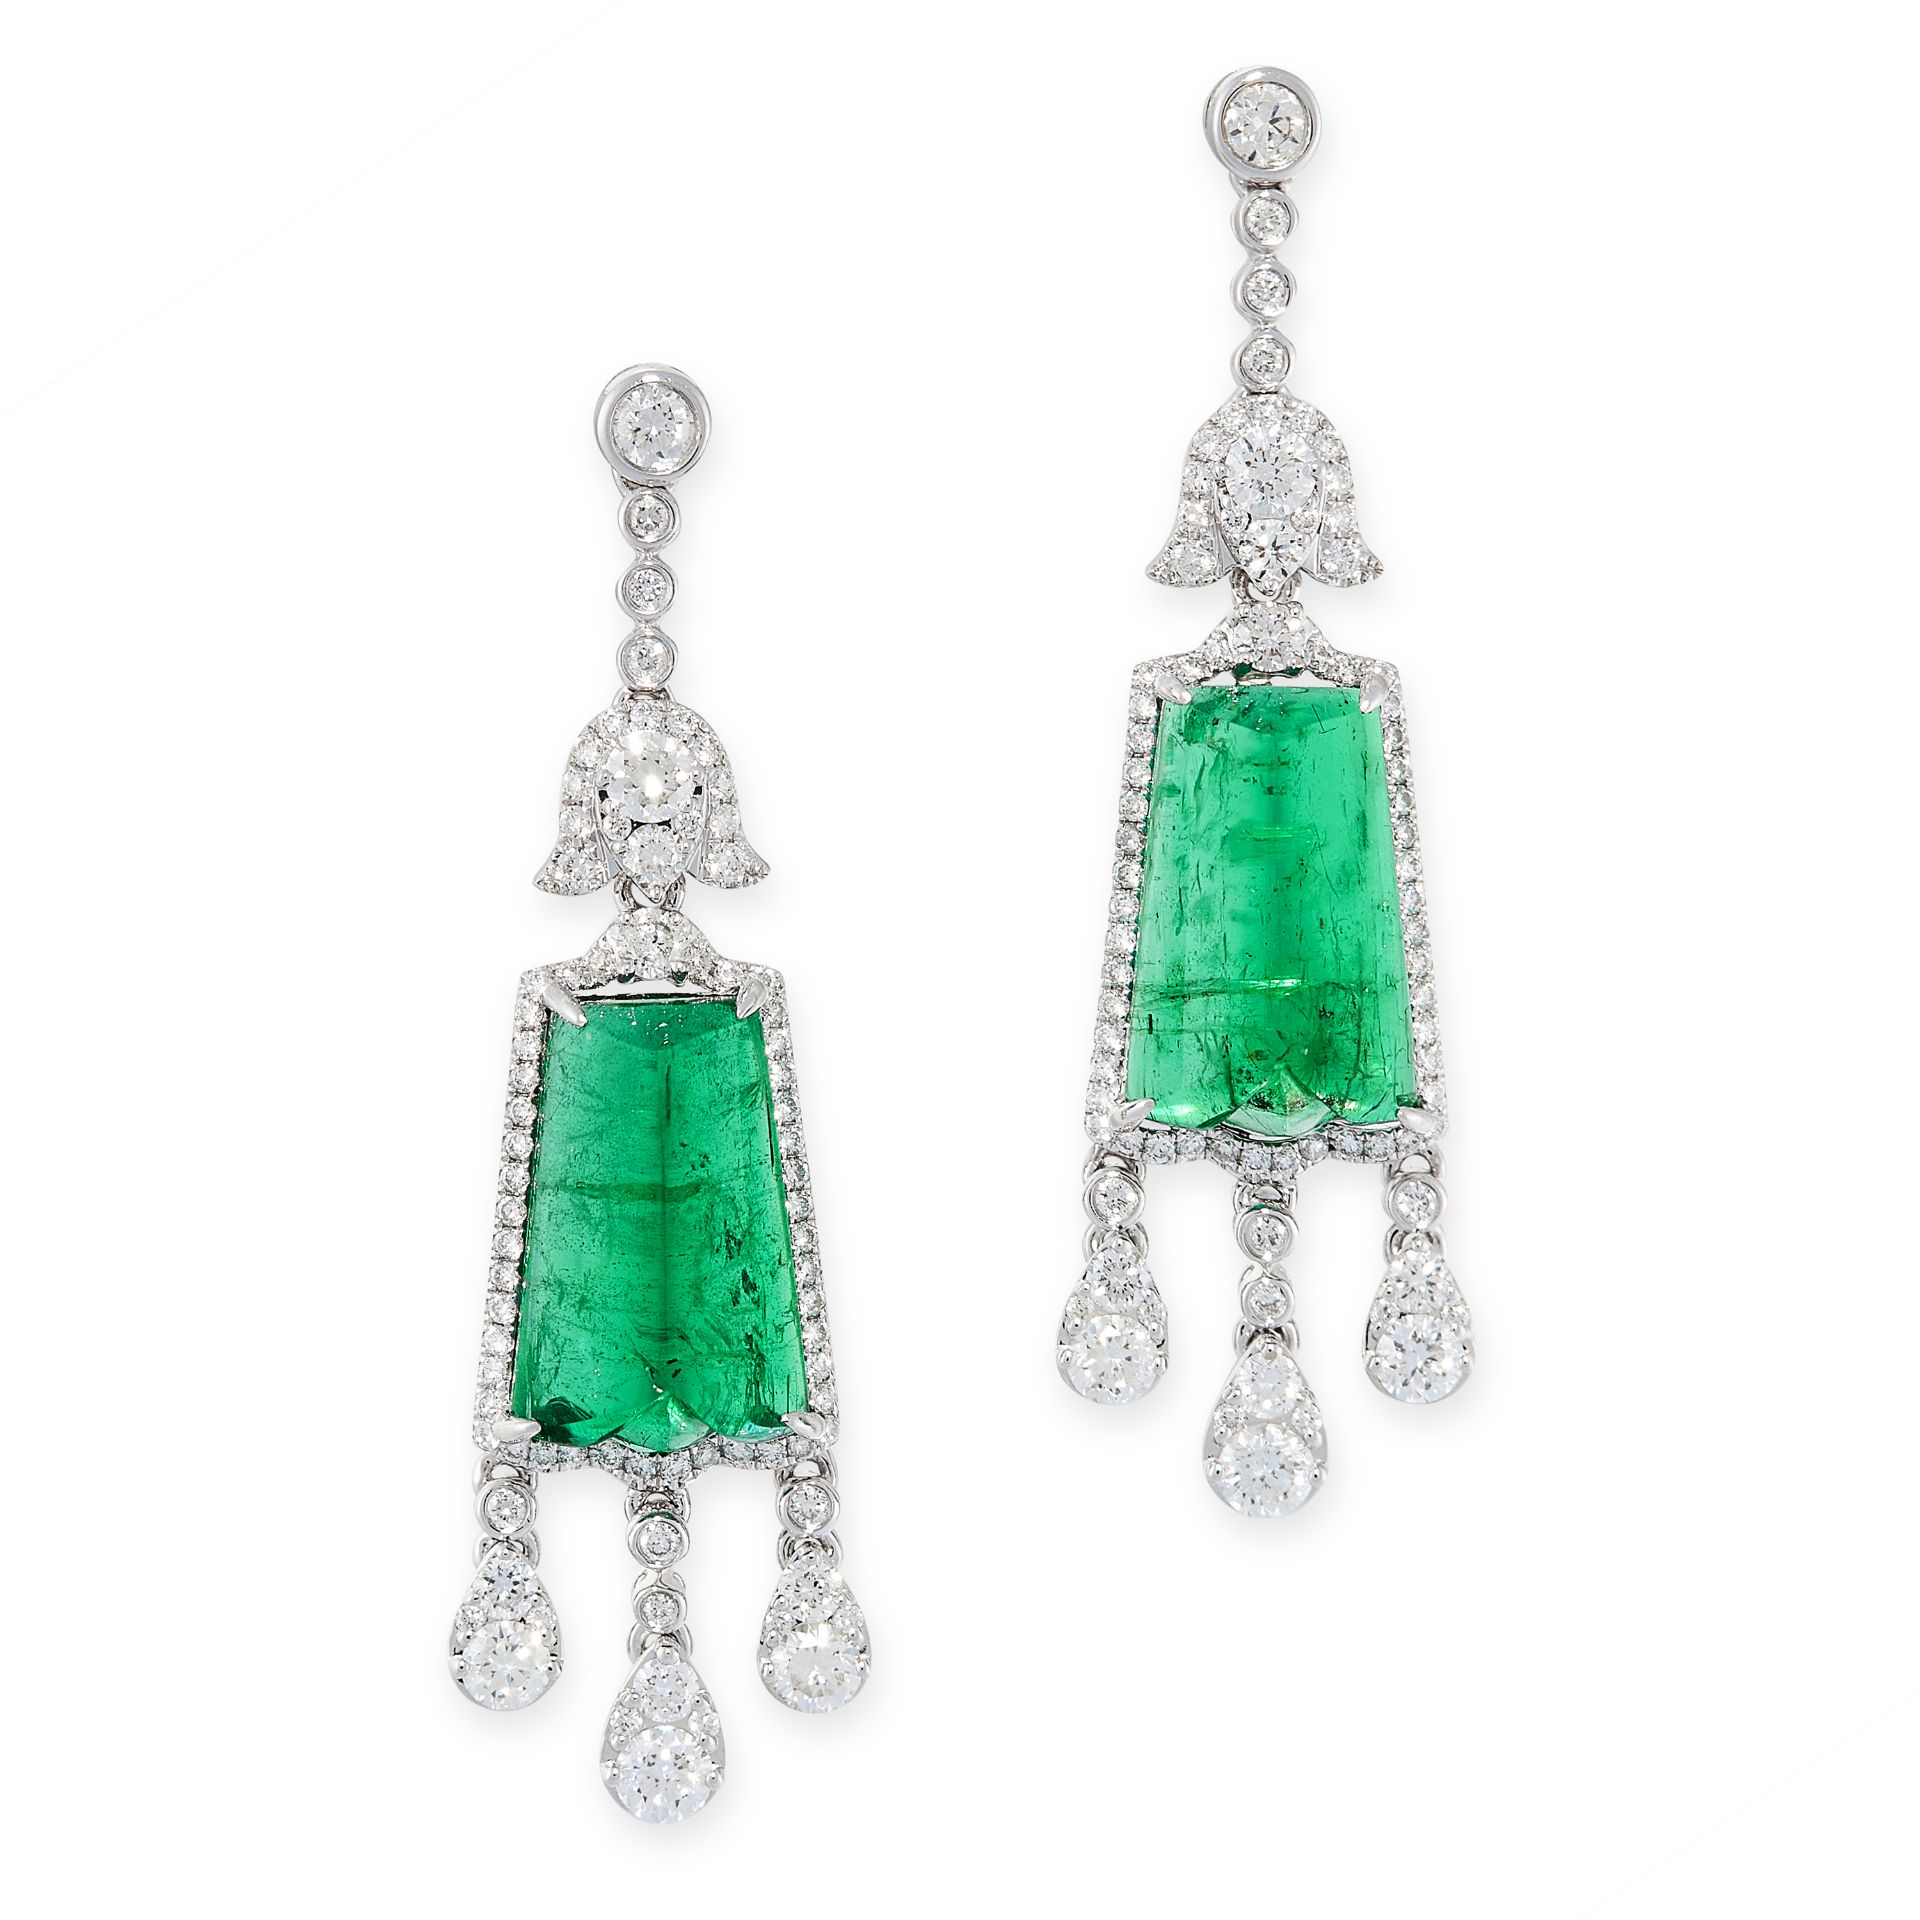 A PAIR OF EMERALD AND DIAMOND EARRINGS, FEI LIU in 18ct white gold, of chandelier design, each set